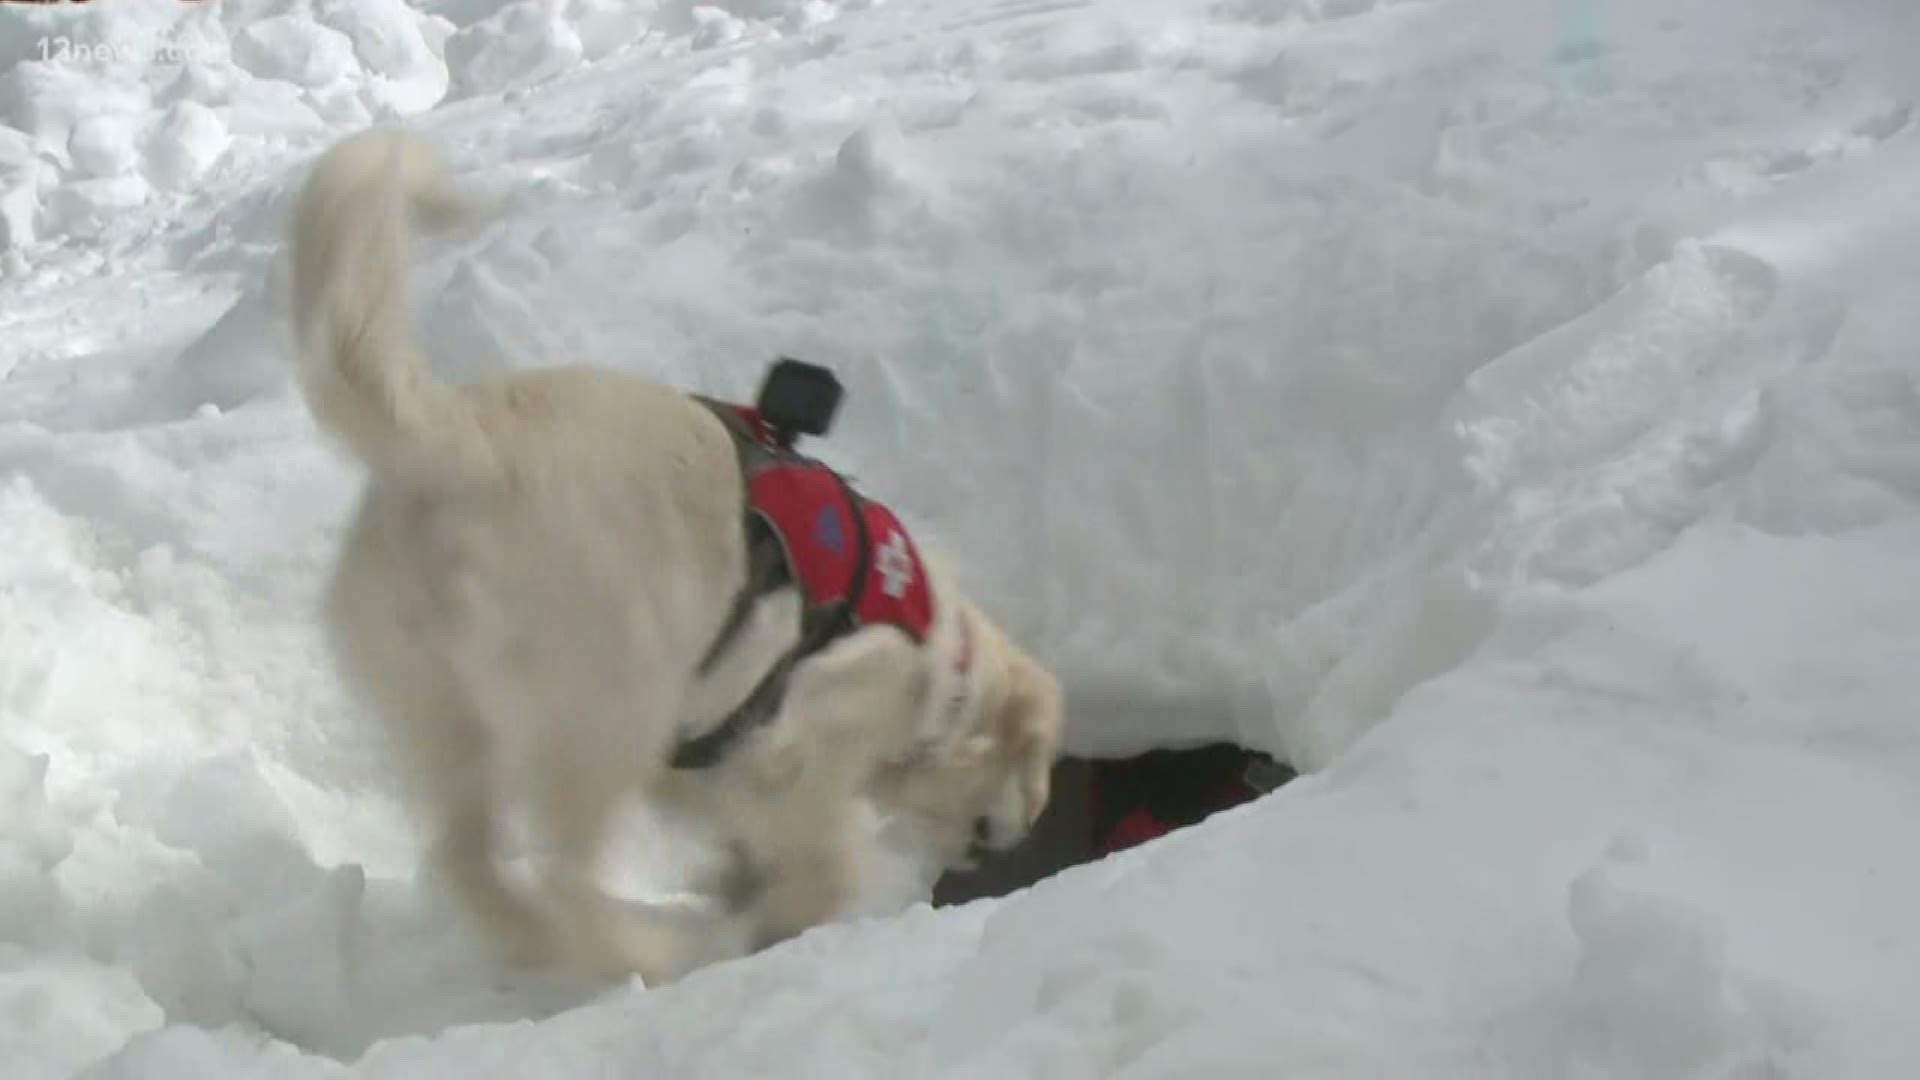 Ava is training to help save people who may be caught in avalanches.